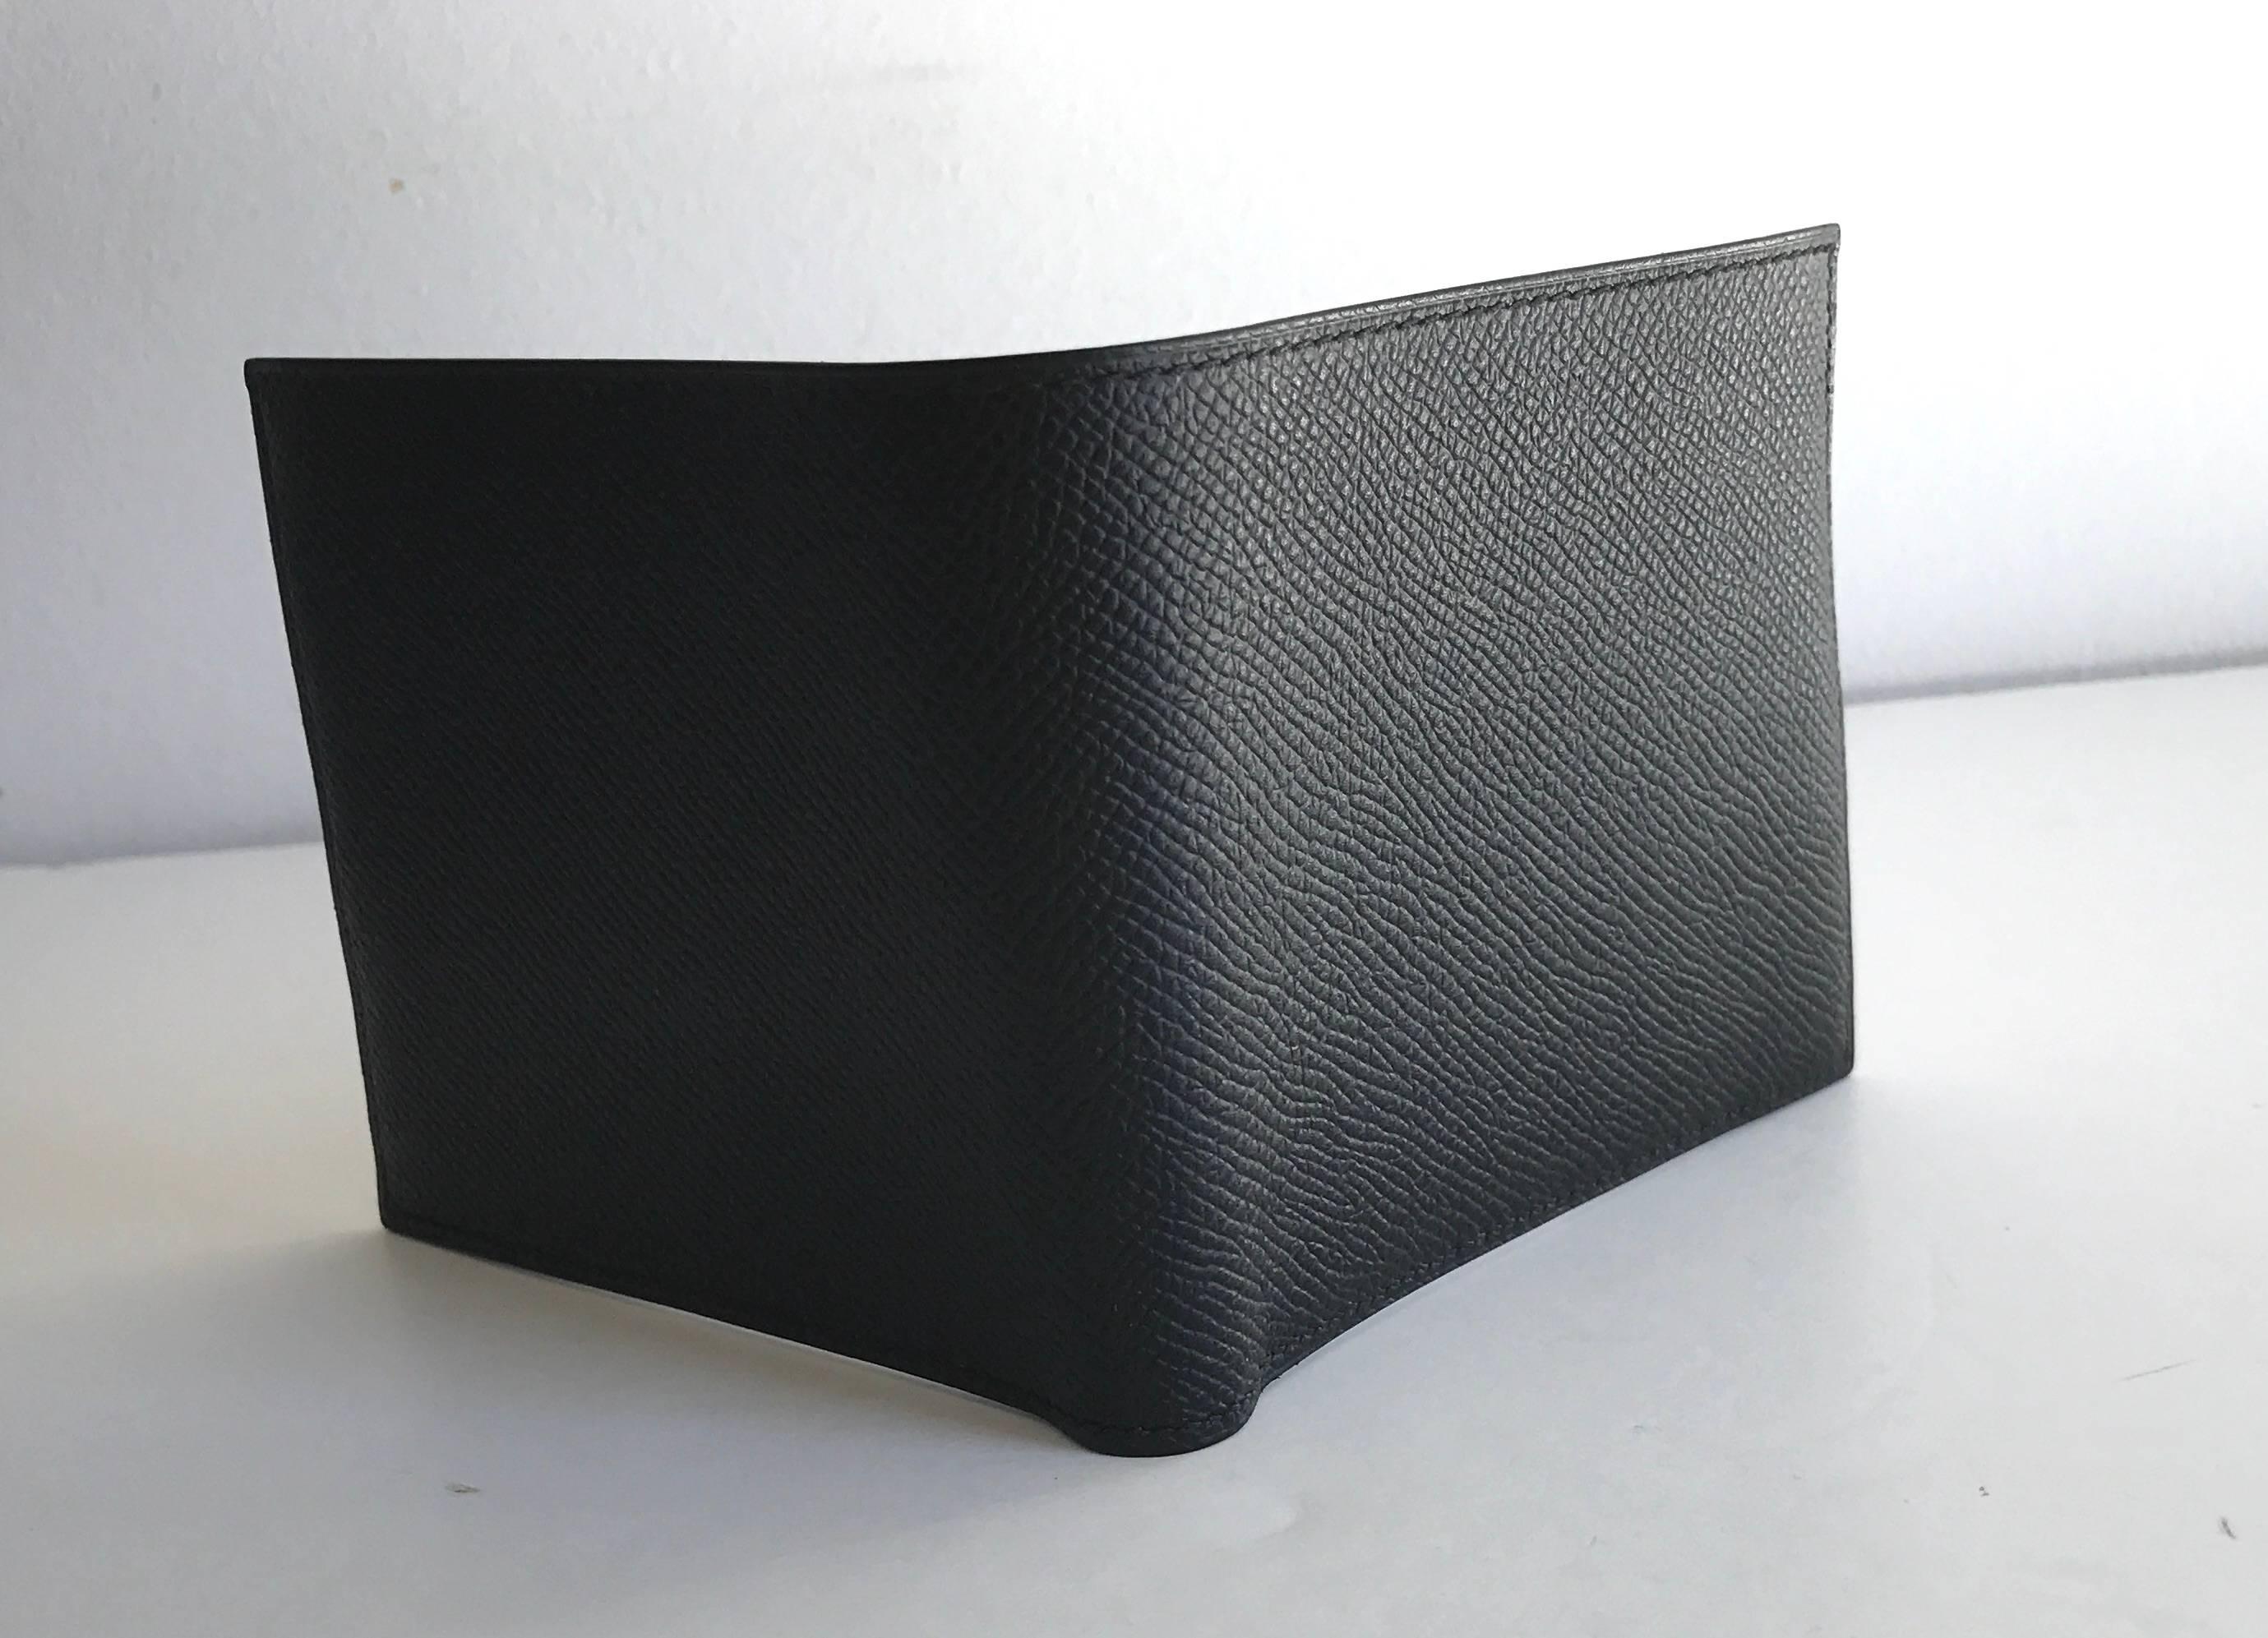 Hermes MC2 Copernic Wallet in Black Epsom
New never used
This wallet will be a treasure for years to come
Perfect Gift
The perfect mens wallet in Black Epsom Leather

MC² Copernic wallet
Hermes wallet in Epsom calfskin
Measures 3.5" x